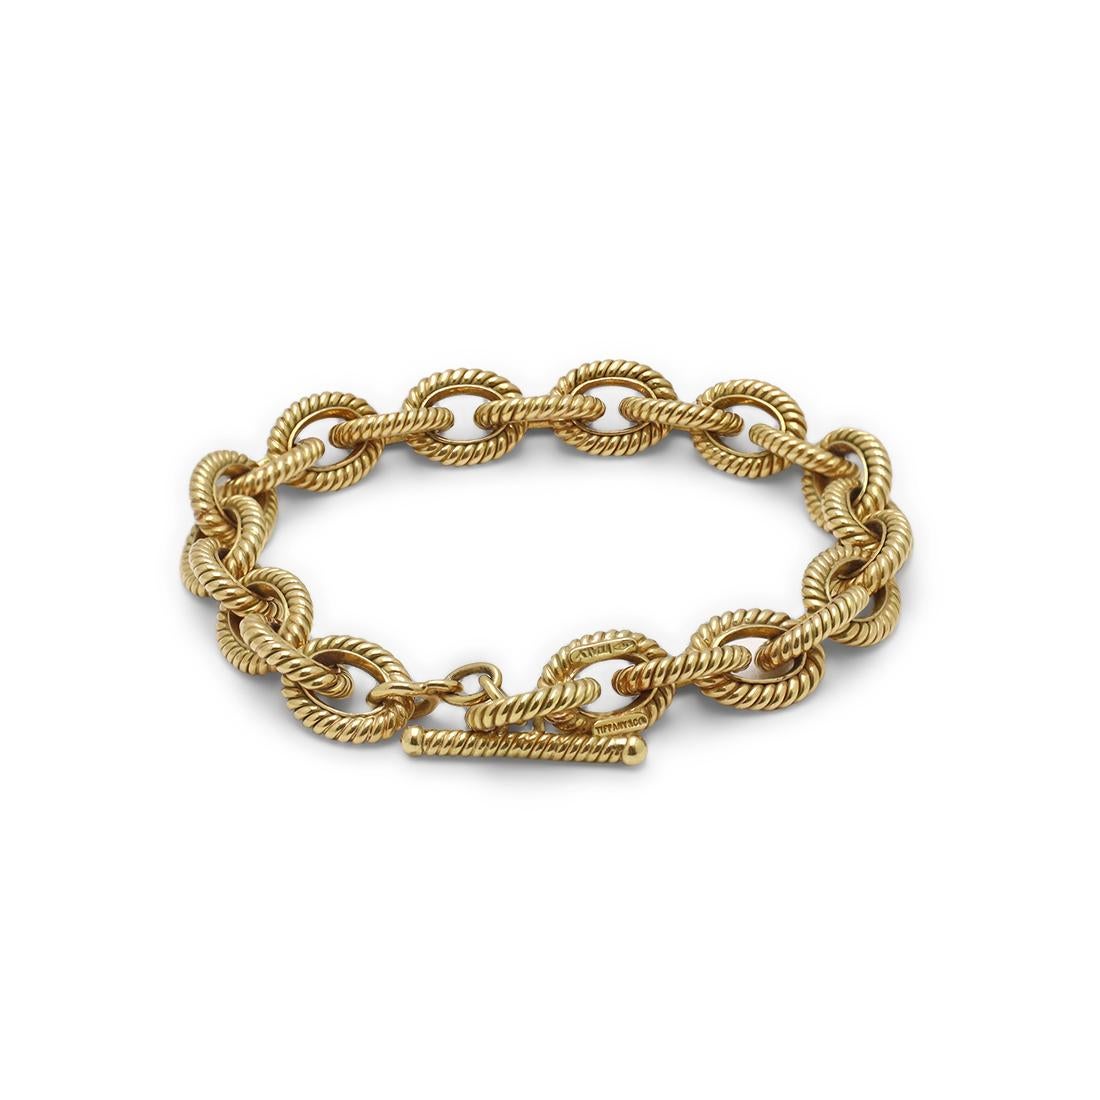 Authentic Tiffany & Co. rope-textured oval link toggle bracelet crafted in 18 karat yellow gold. The bracelet measures 7 1/4 in length and 10mm in width. Signed Tiffany & Co., 750, Italy. The bracelet is not presented with the original papers or